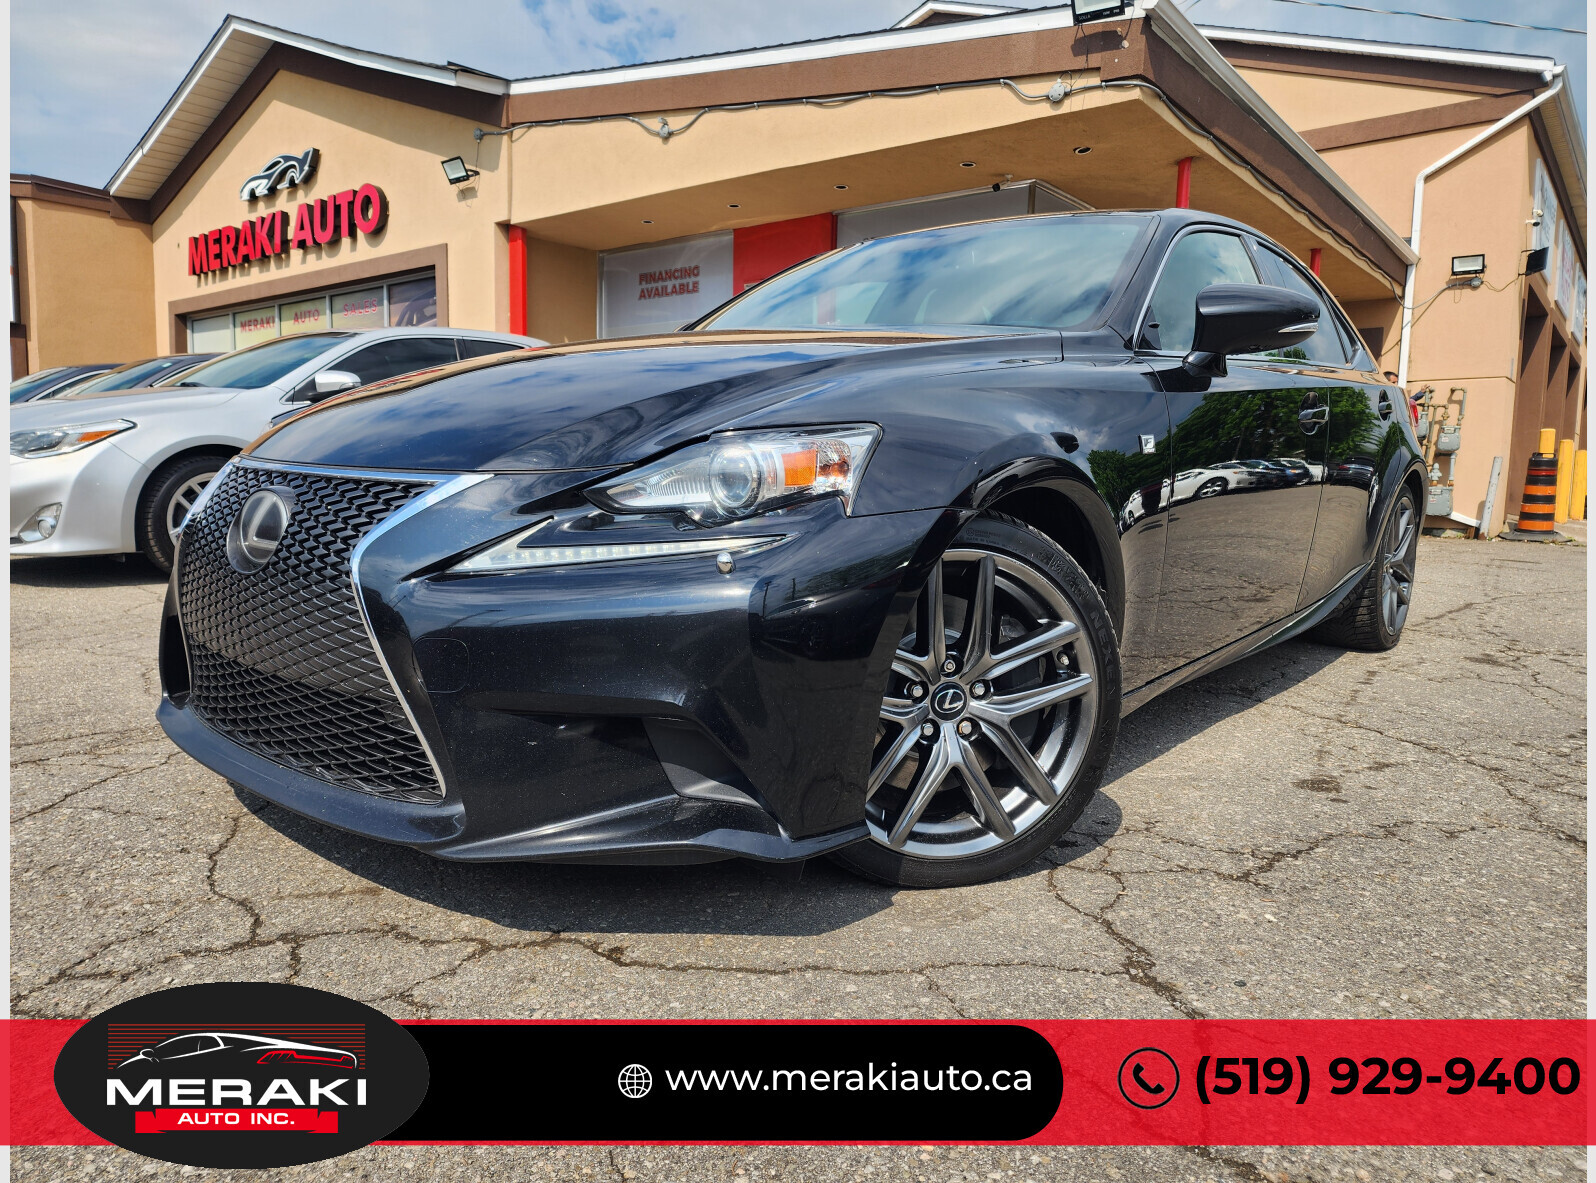 2015 Lexus IS 350 F-SPORT | RED LEATHER INTERIOR